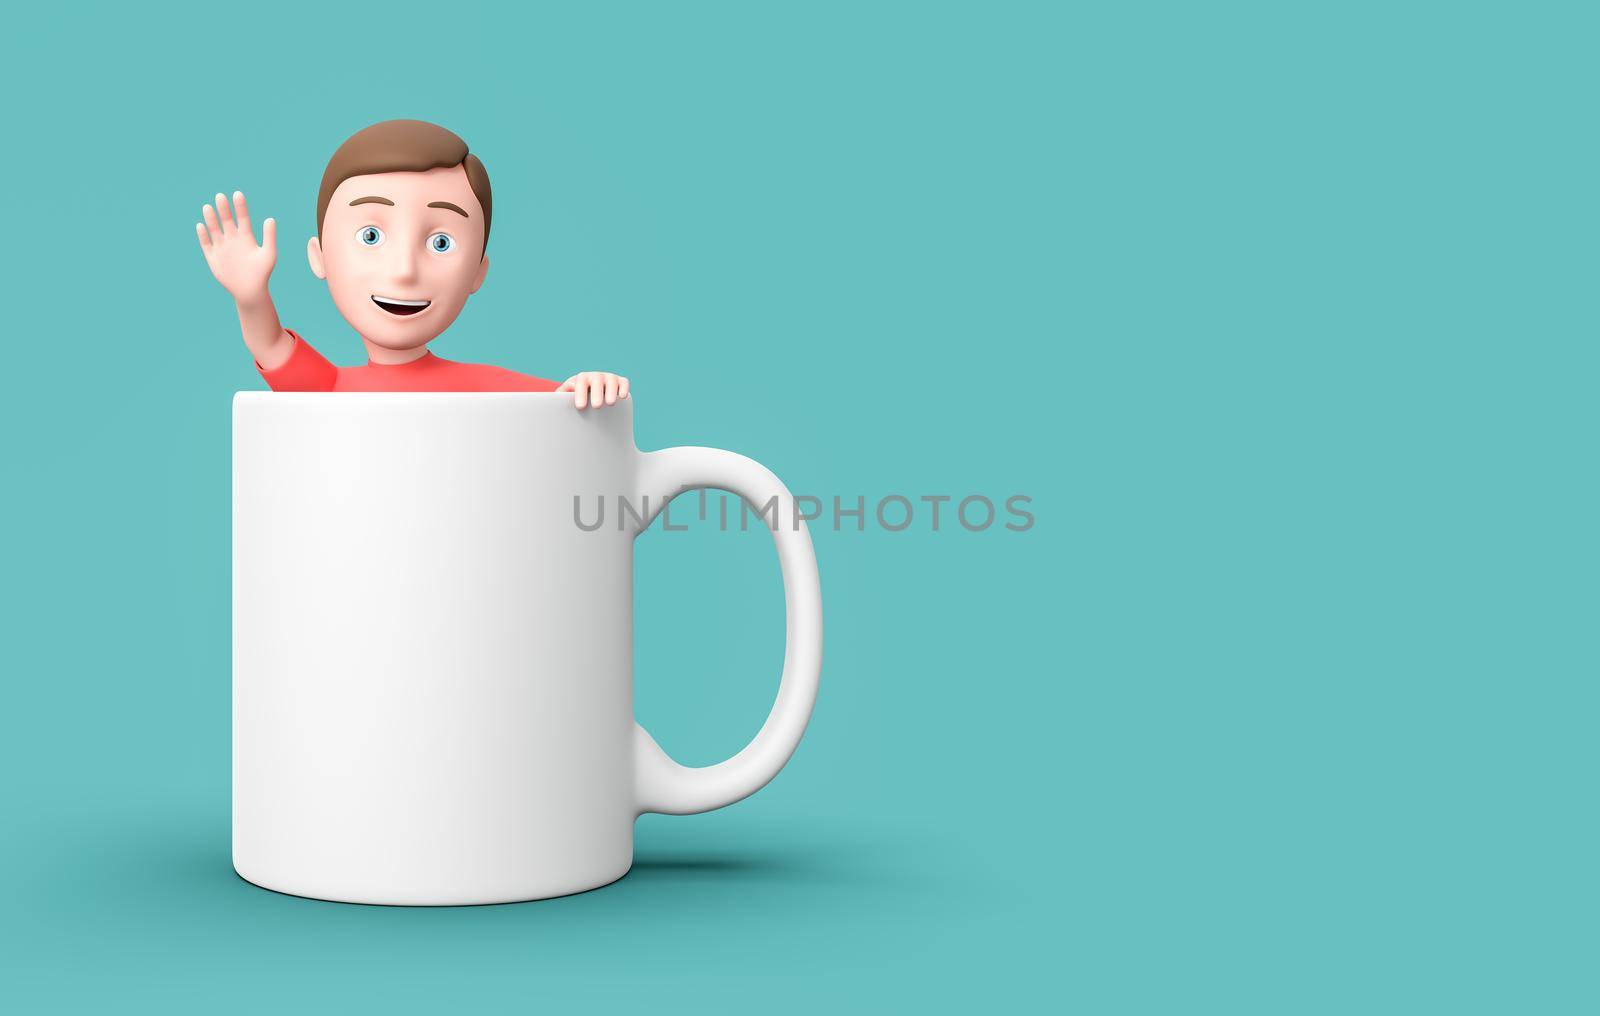 Young 3D Cartoon Character Inside a Mug on Blue Background with Copy Space by make